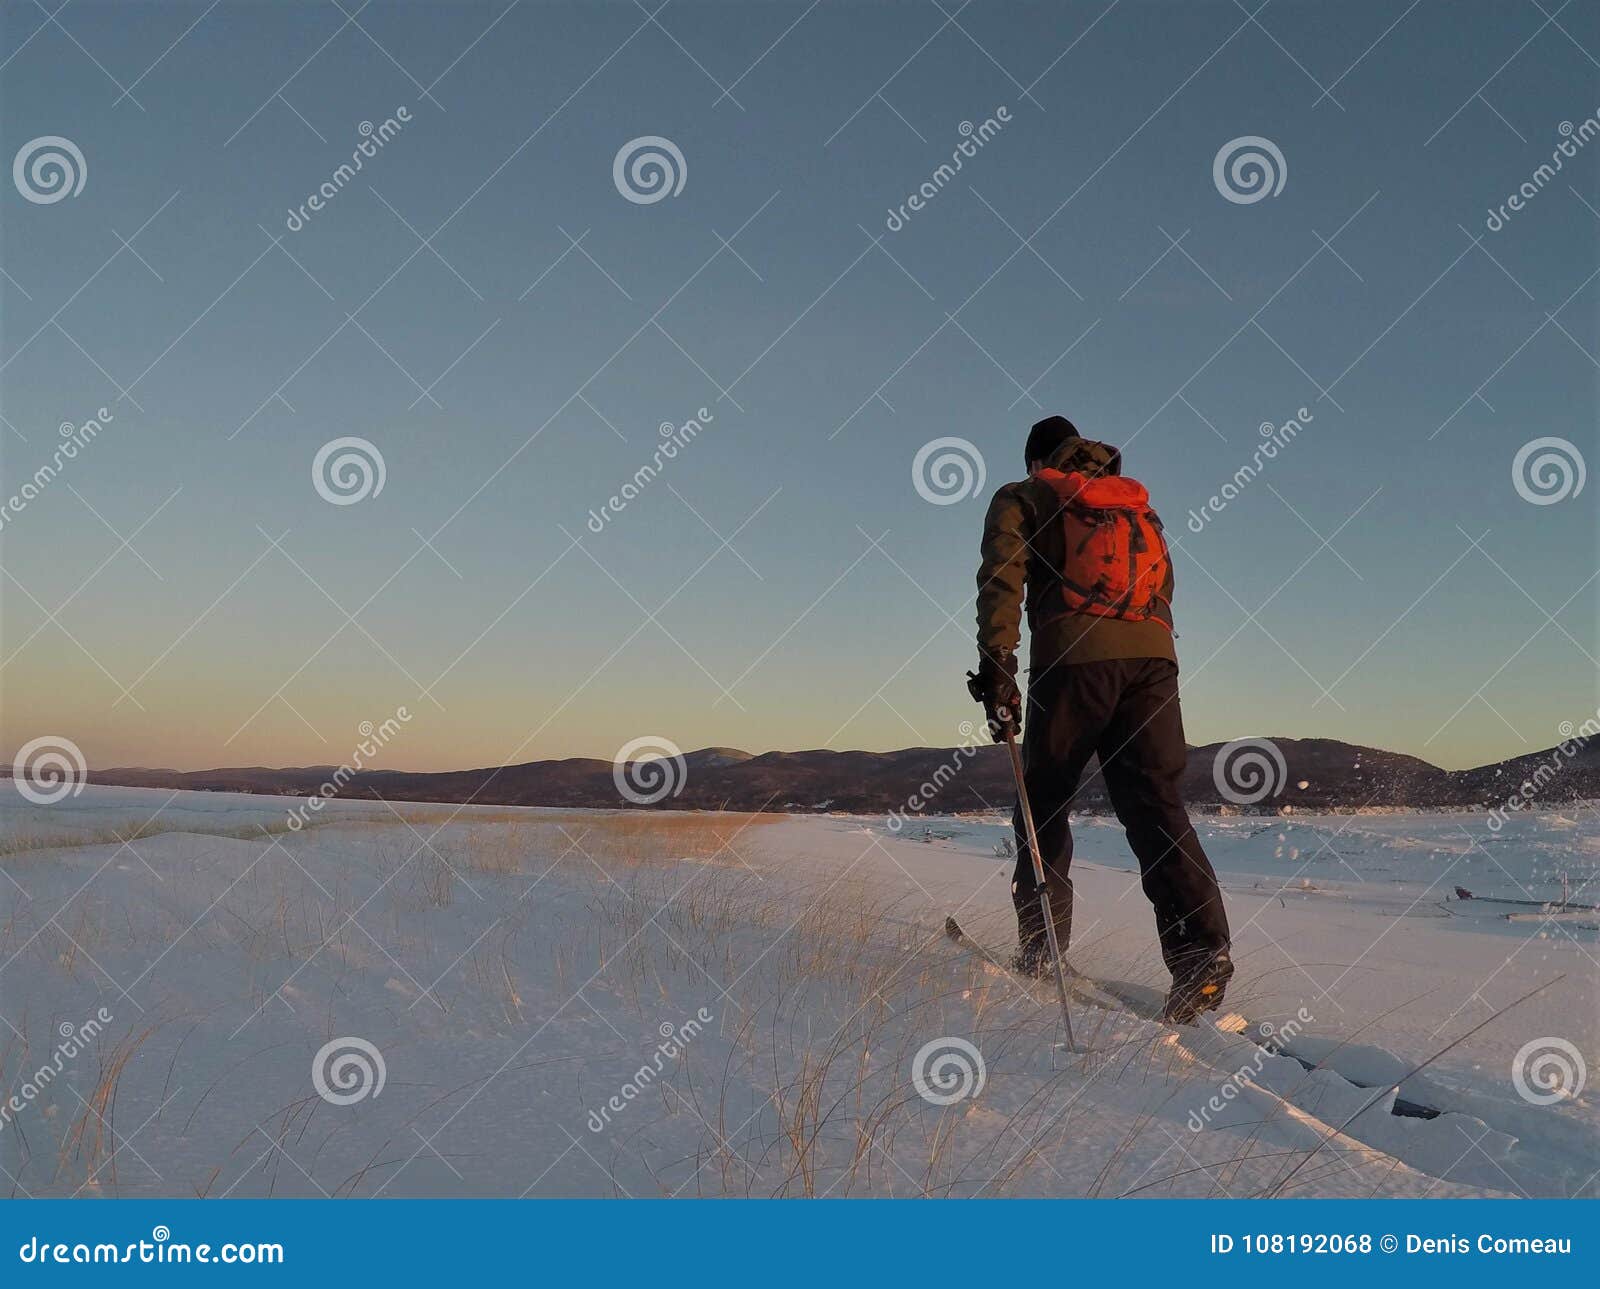 Backcountry Cross Country Skiing On A Cold Winter Morning Stock Photo